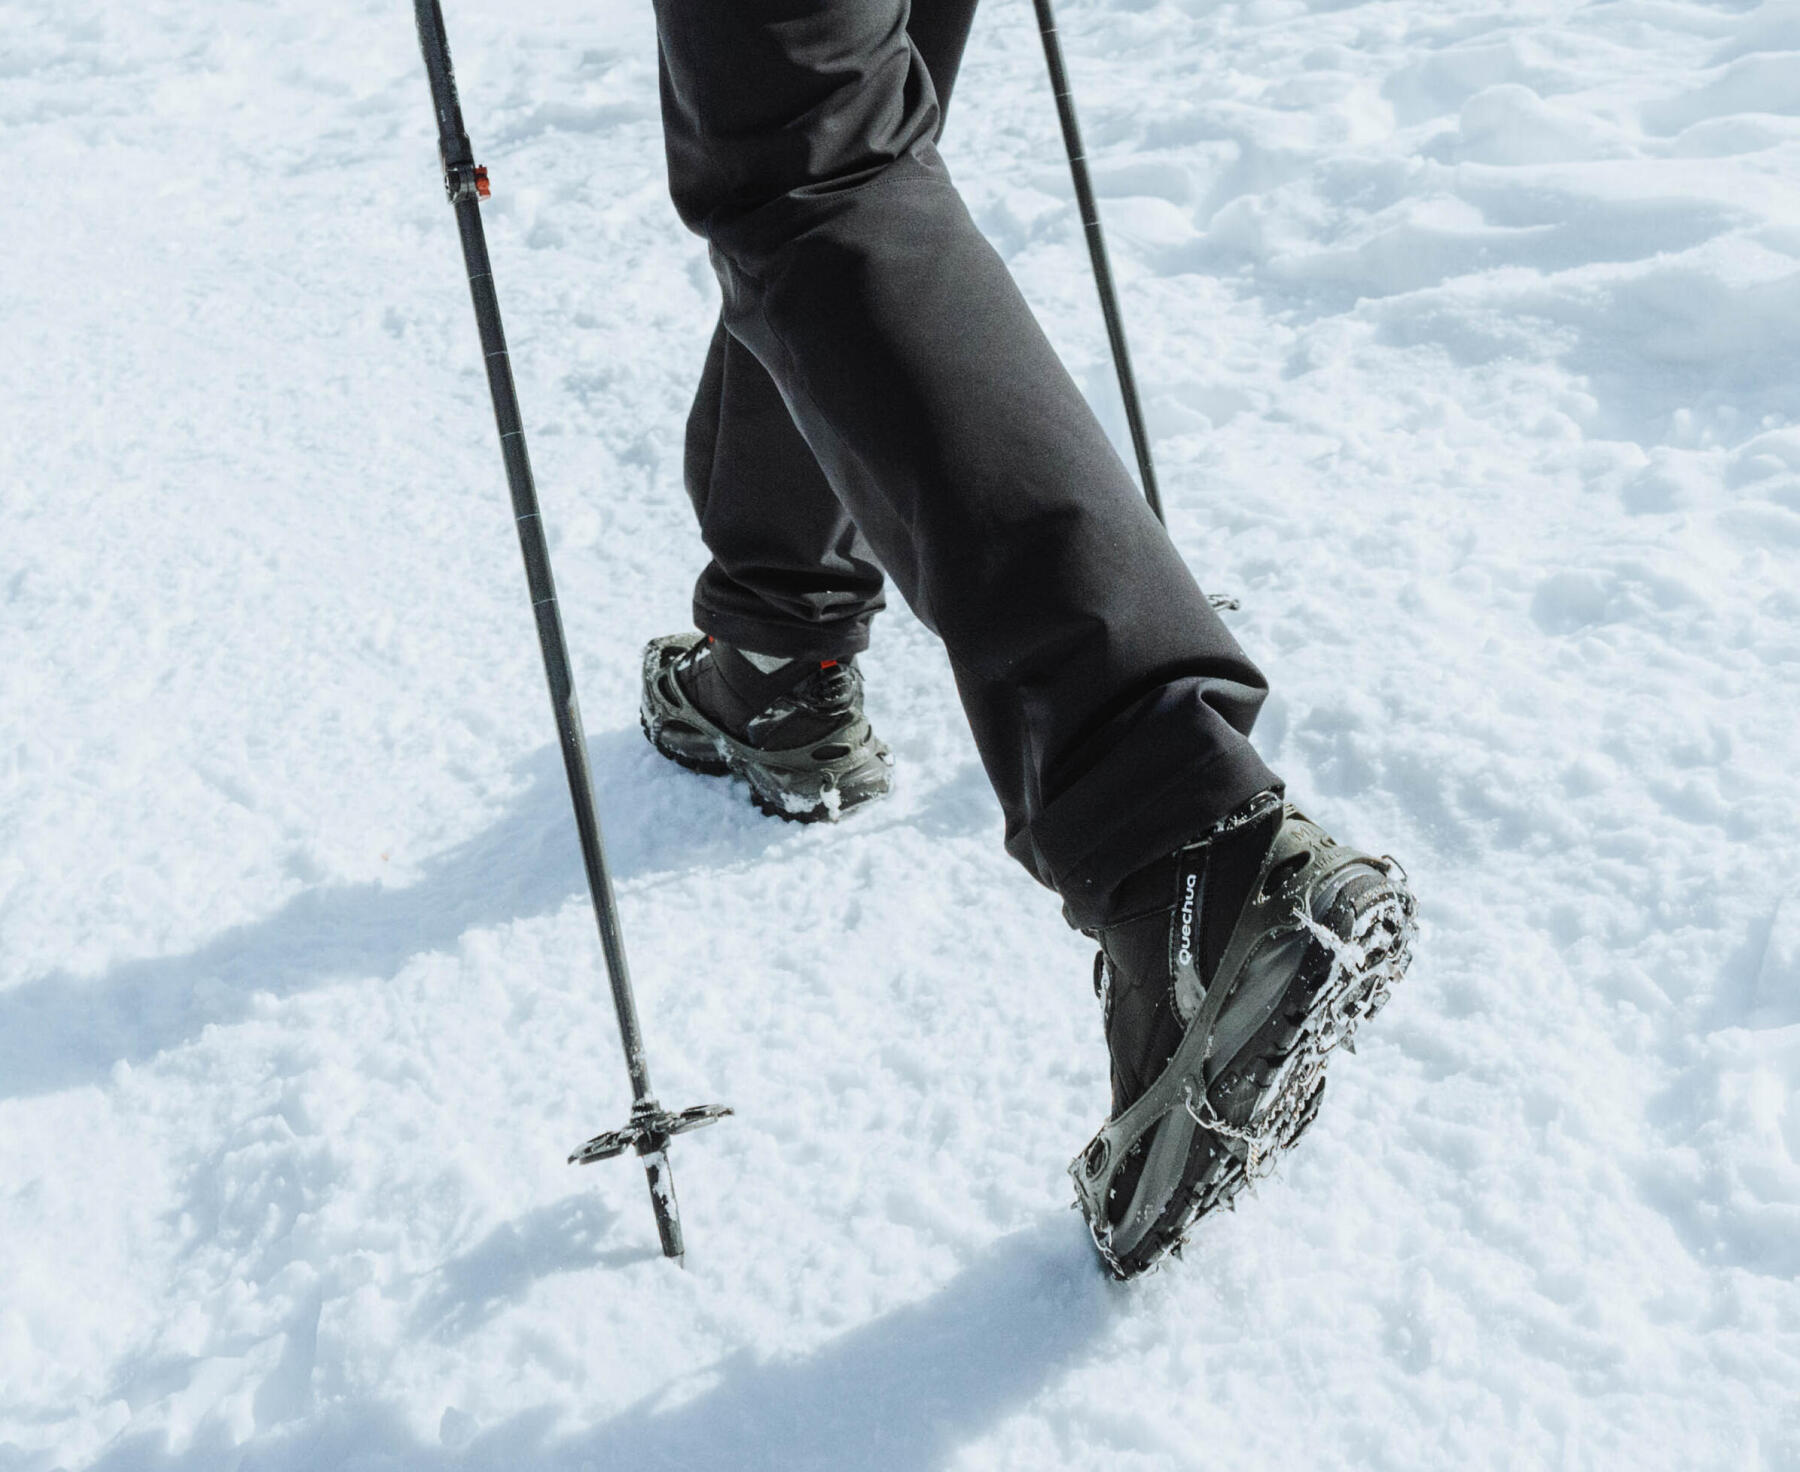 Everything about crampons